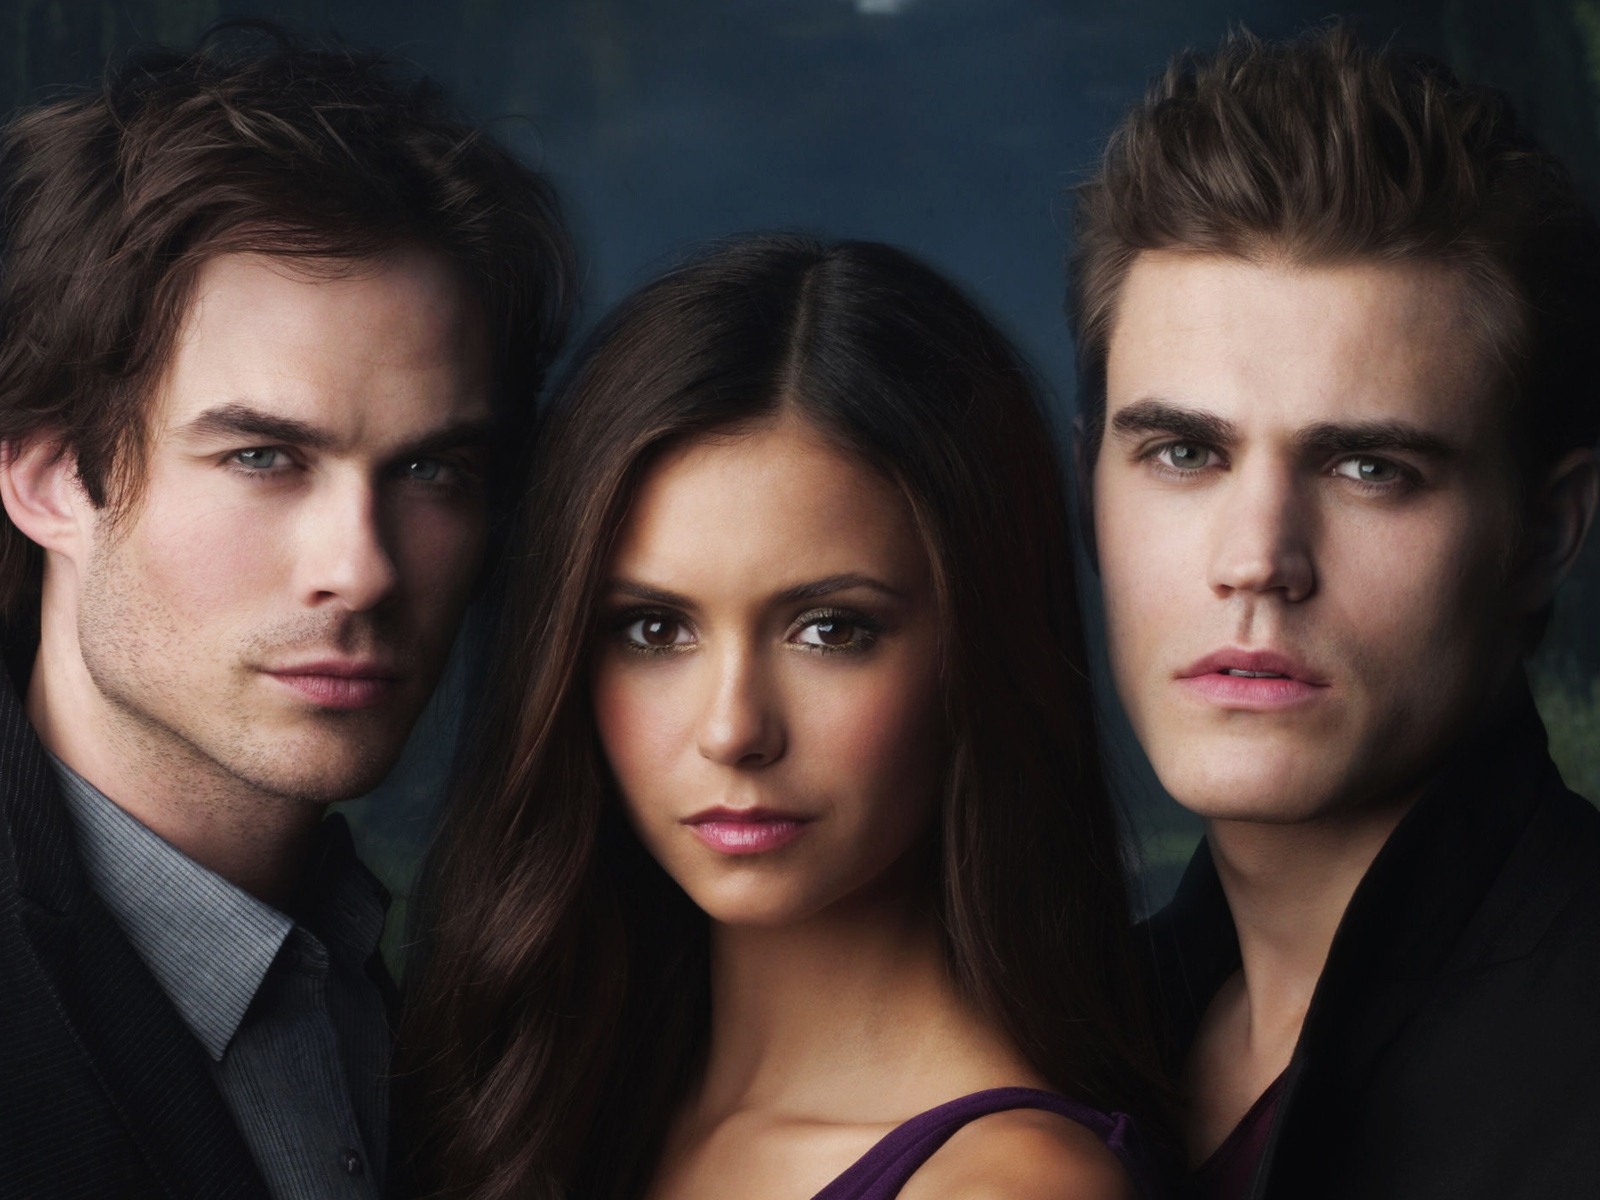 The Vampire Diaries wallpapers HD #4 - 1600x1200